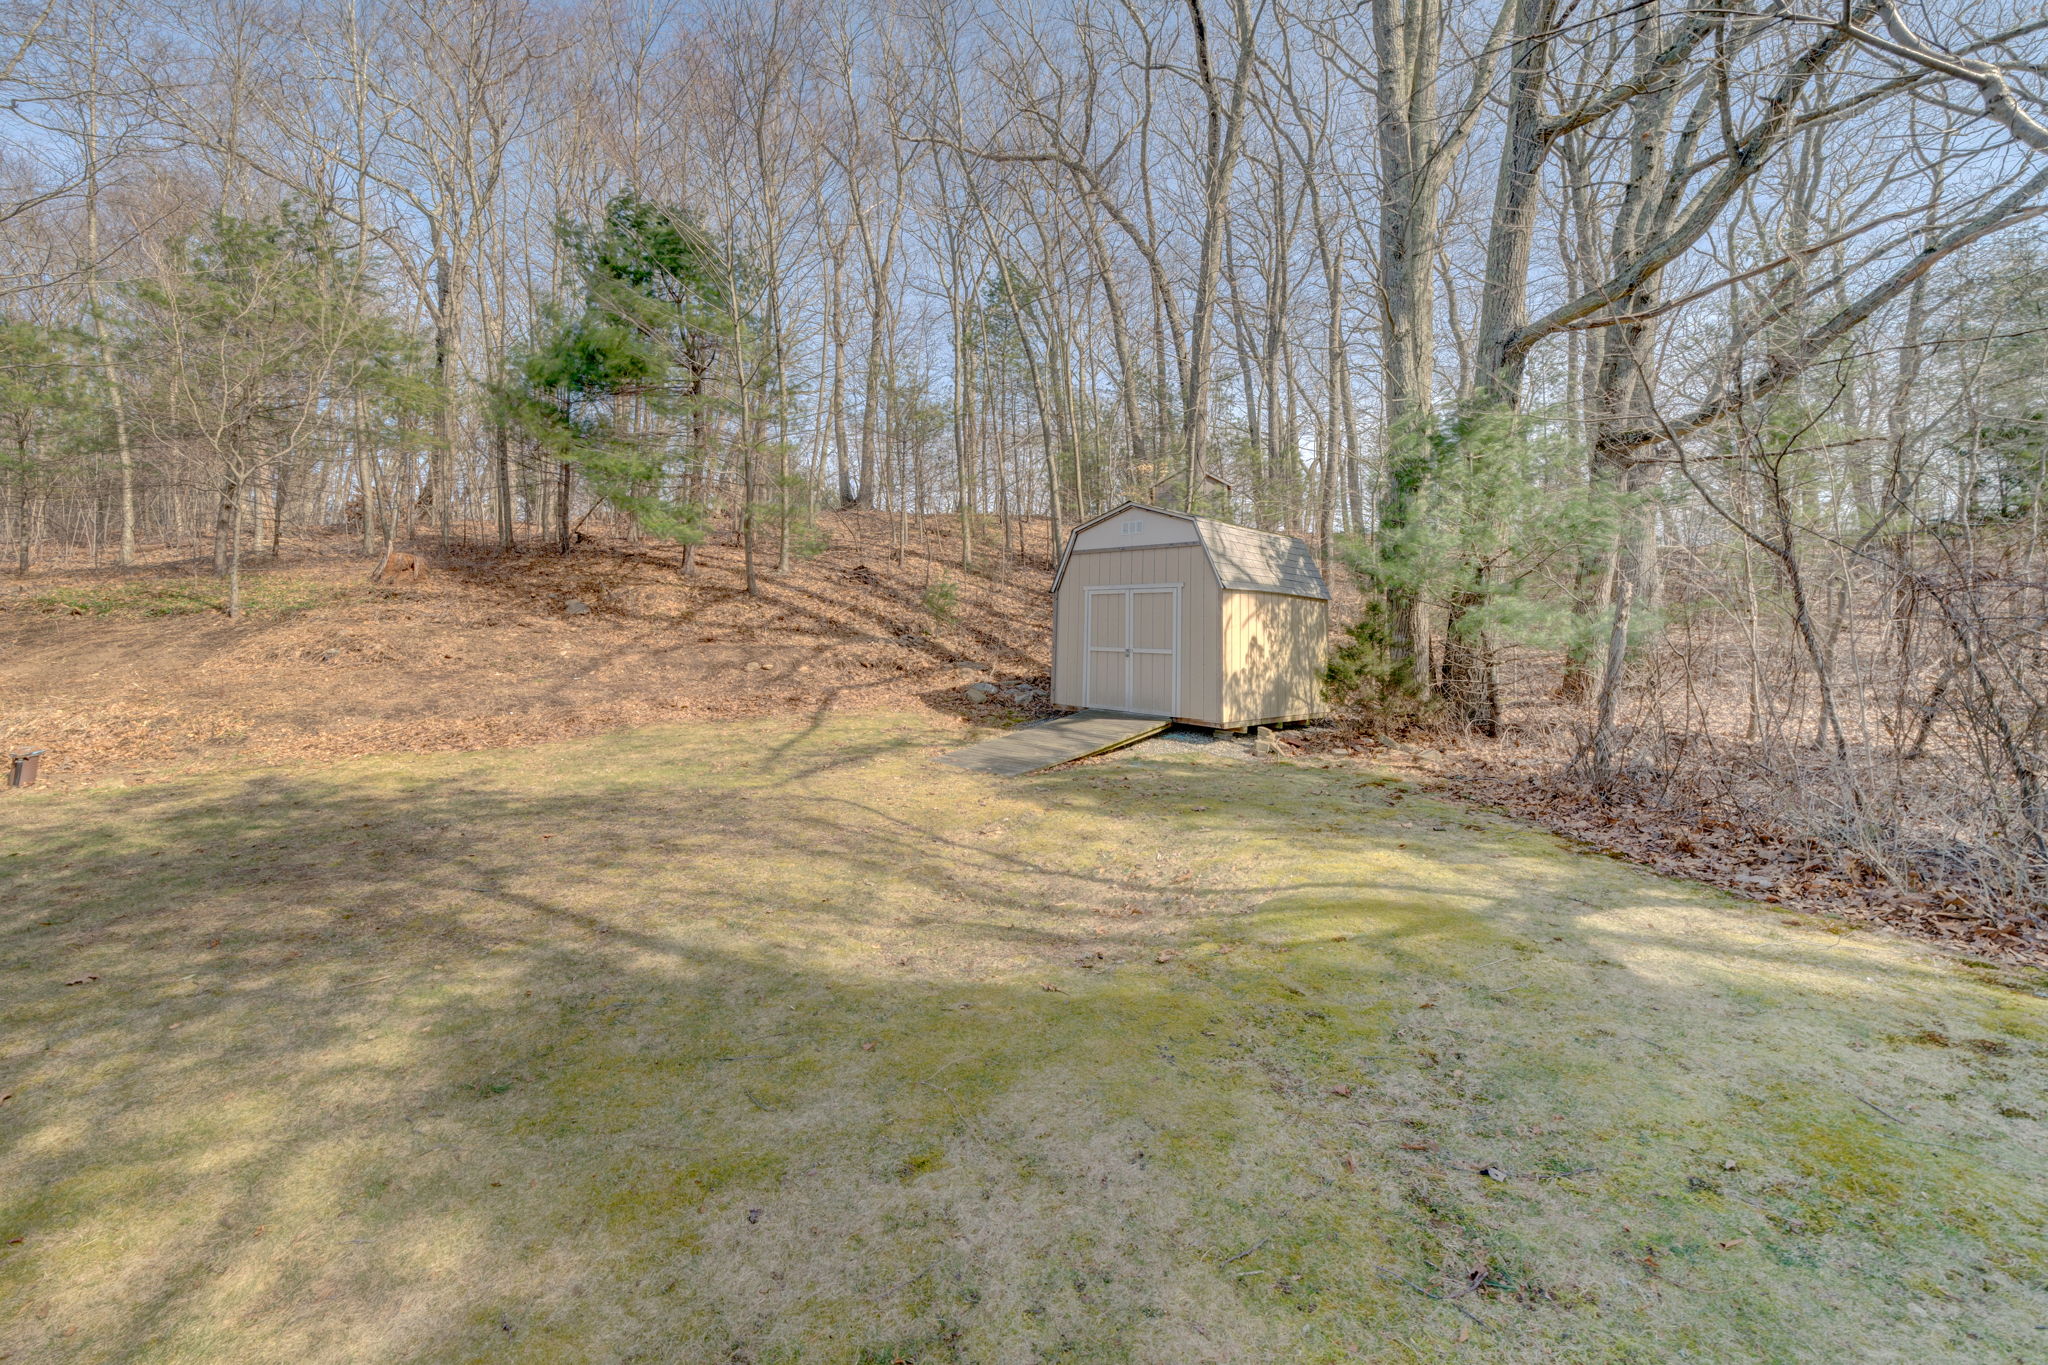  13 Quinebaug Camp Rd, Griswold, CT 06351, US Photo 44